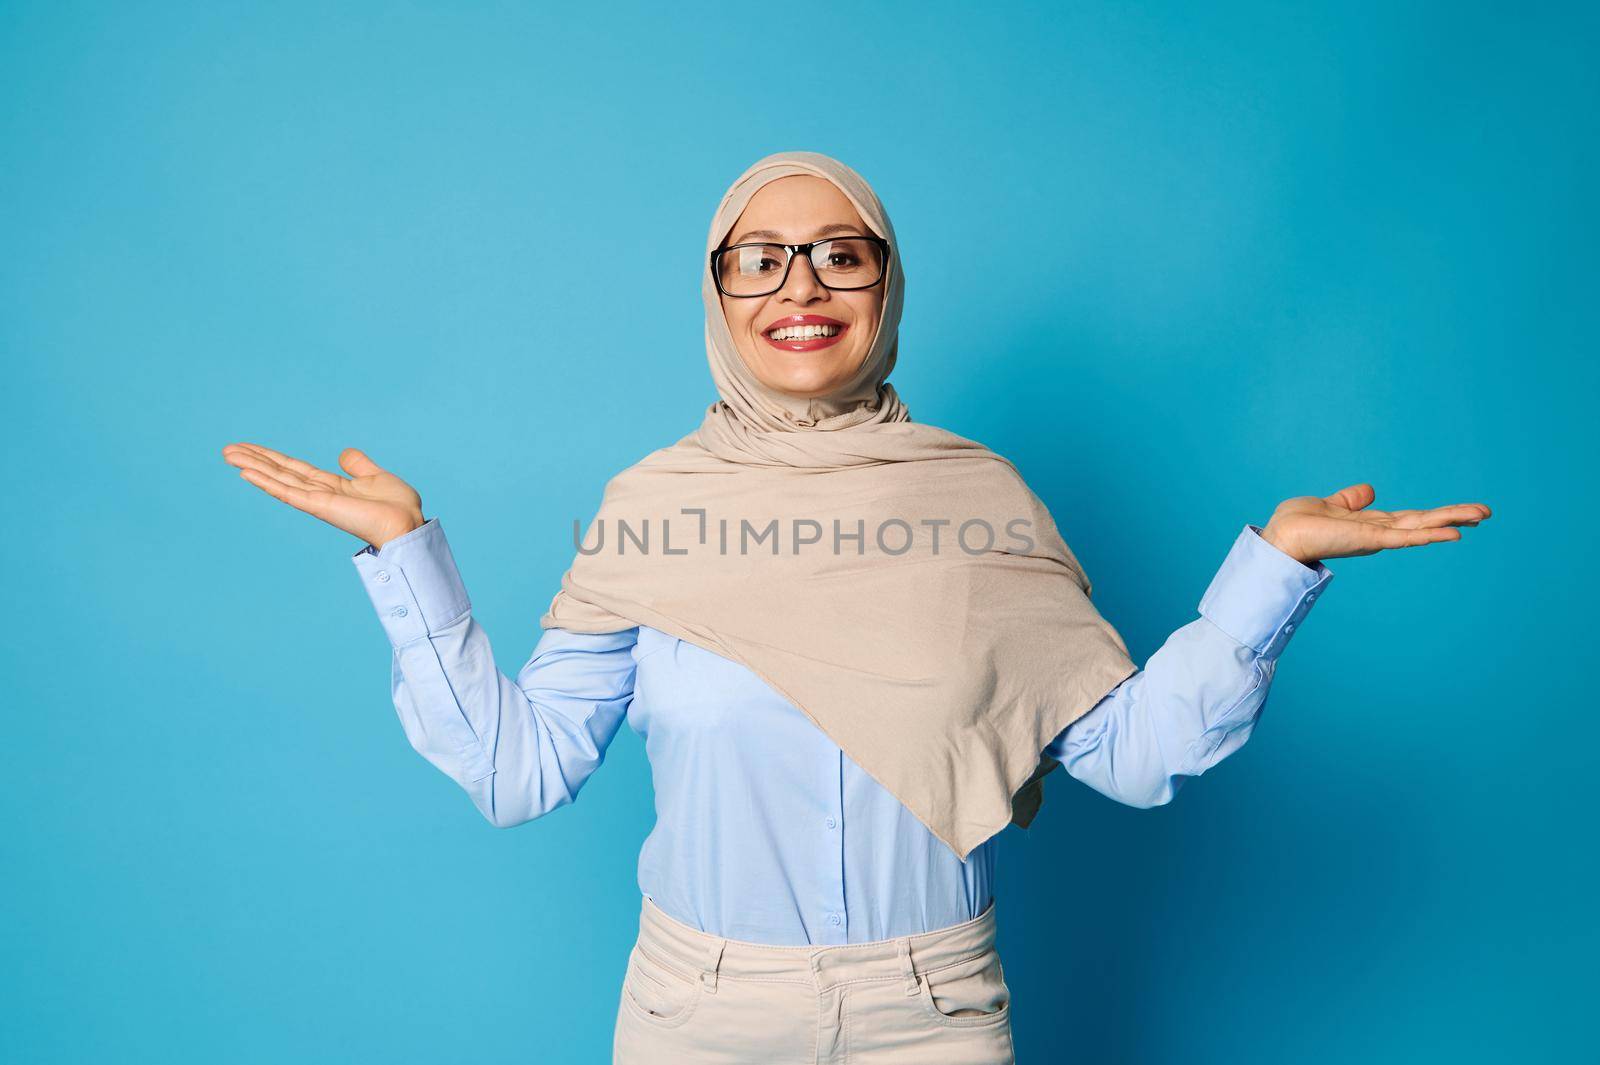 Smiling woman with covered head in hijab posing with outstretched arms and palms up, presenting on blue background with space for text